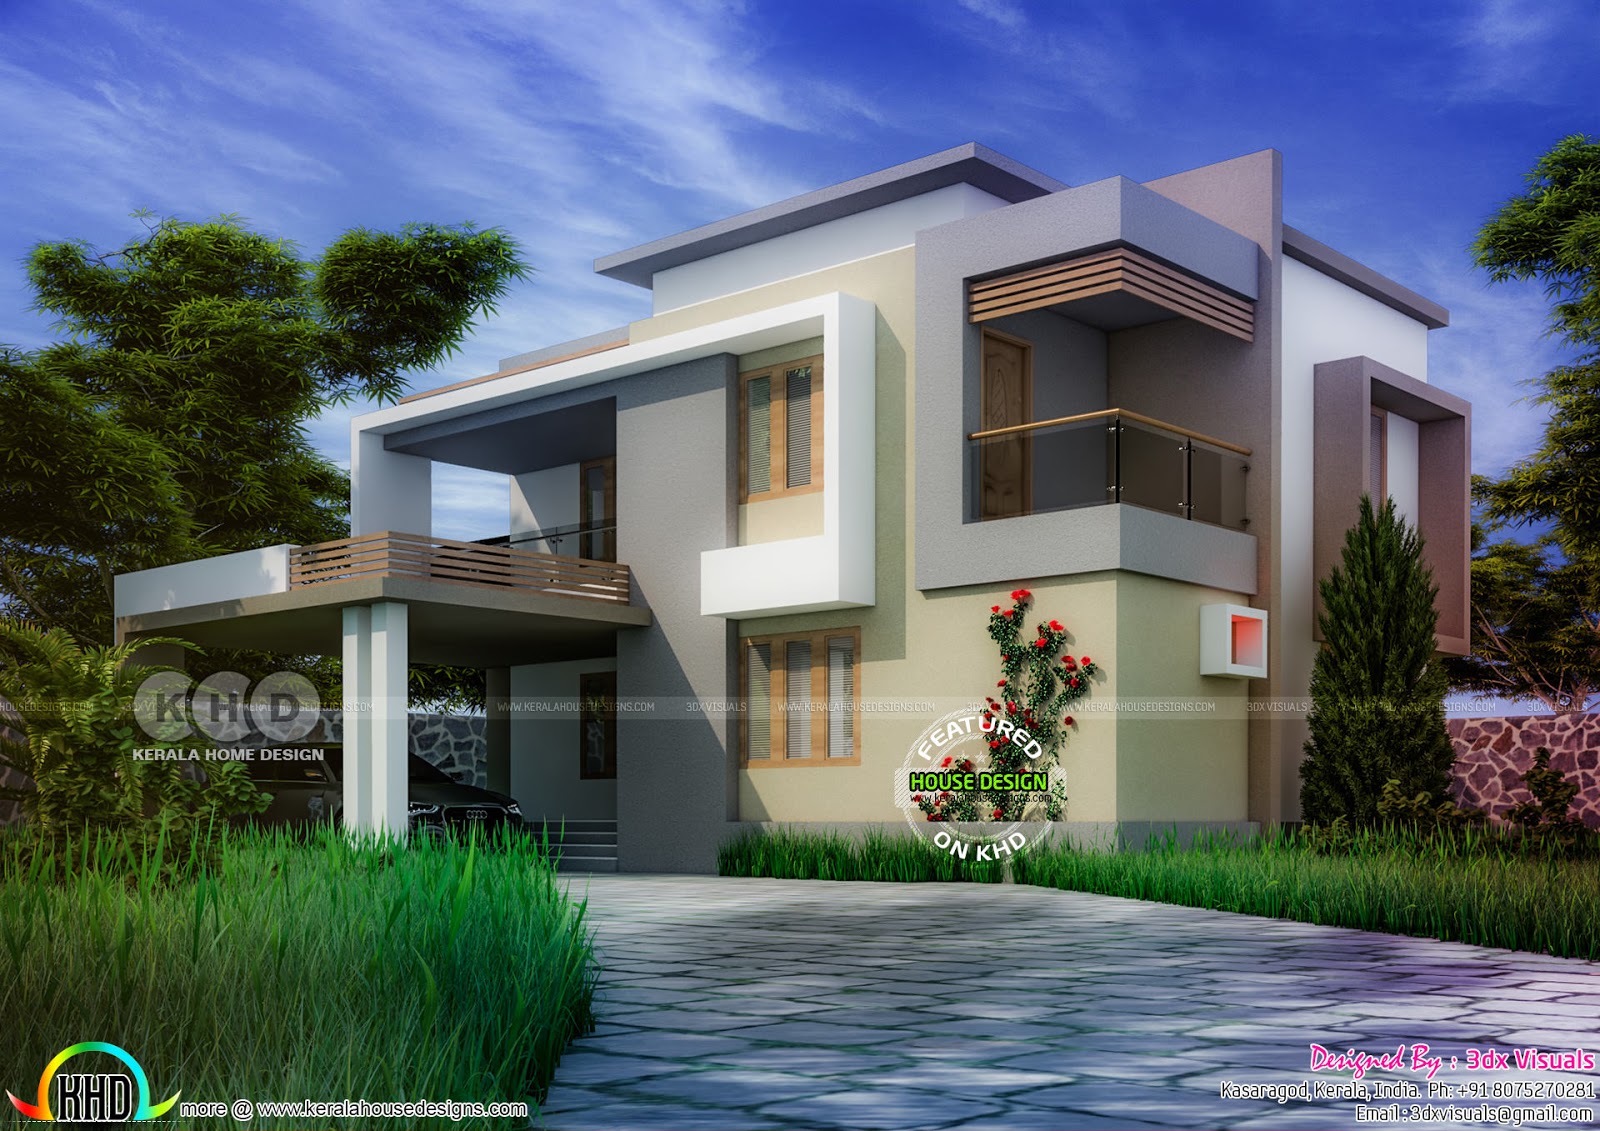 5 bedroom contemporary residence exterior with interiors ...